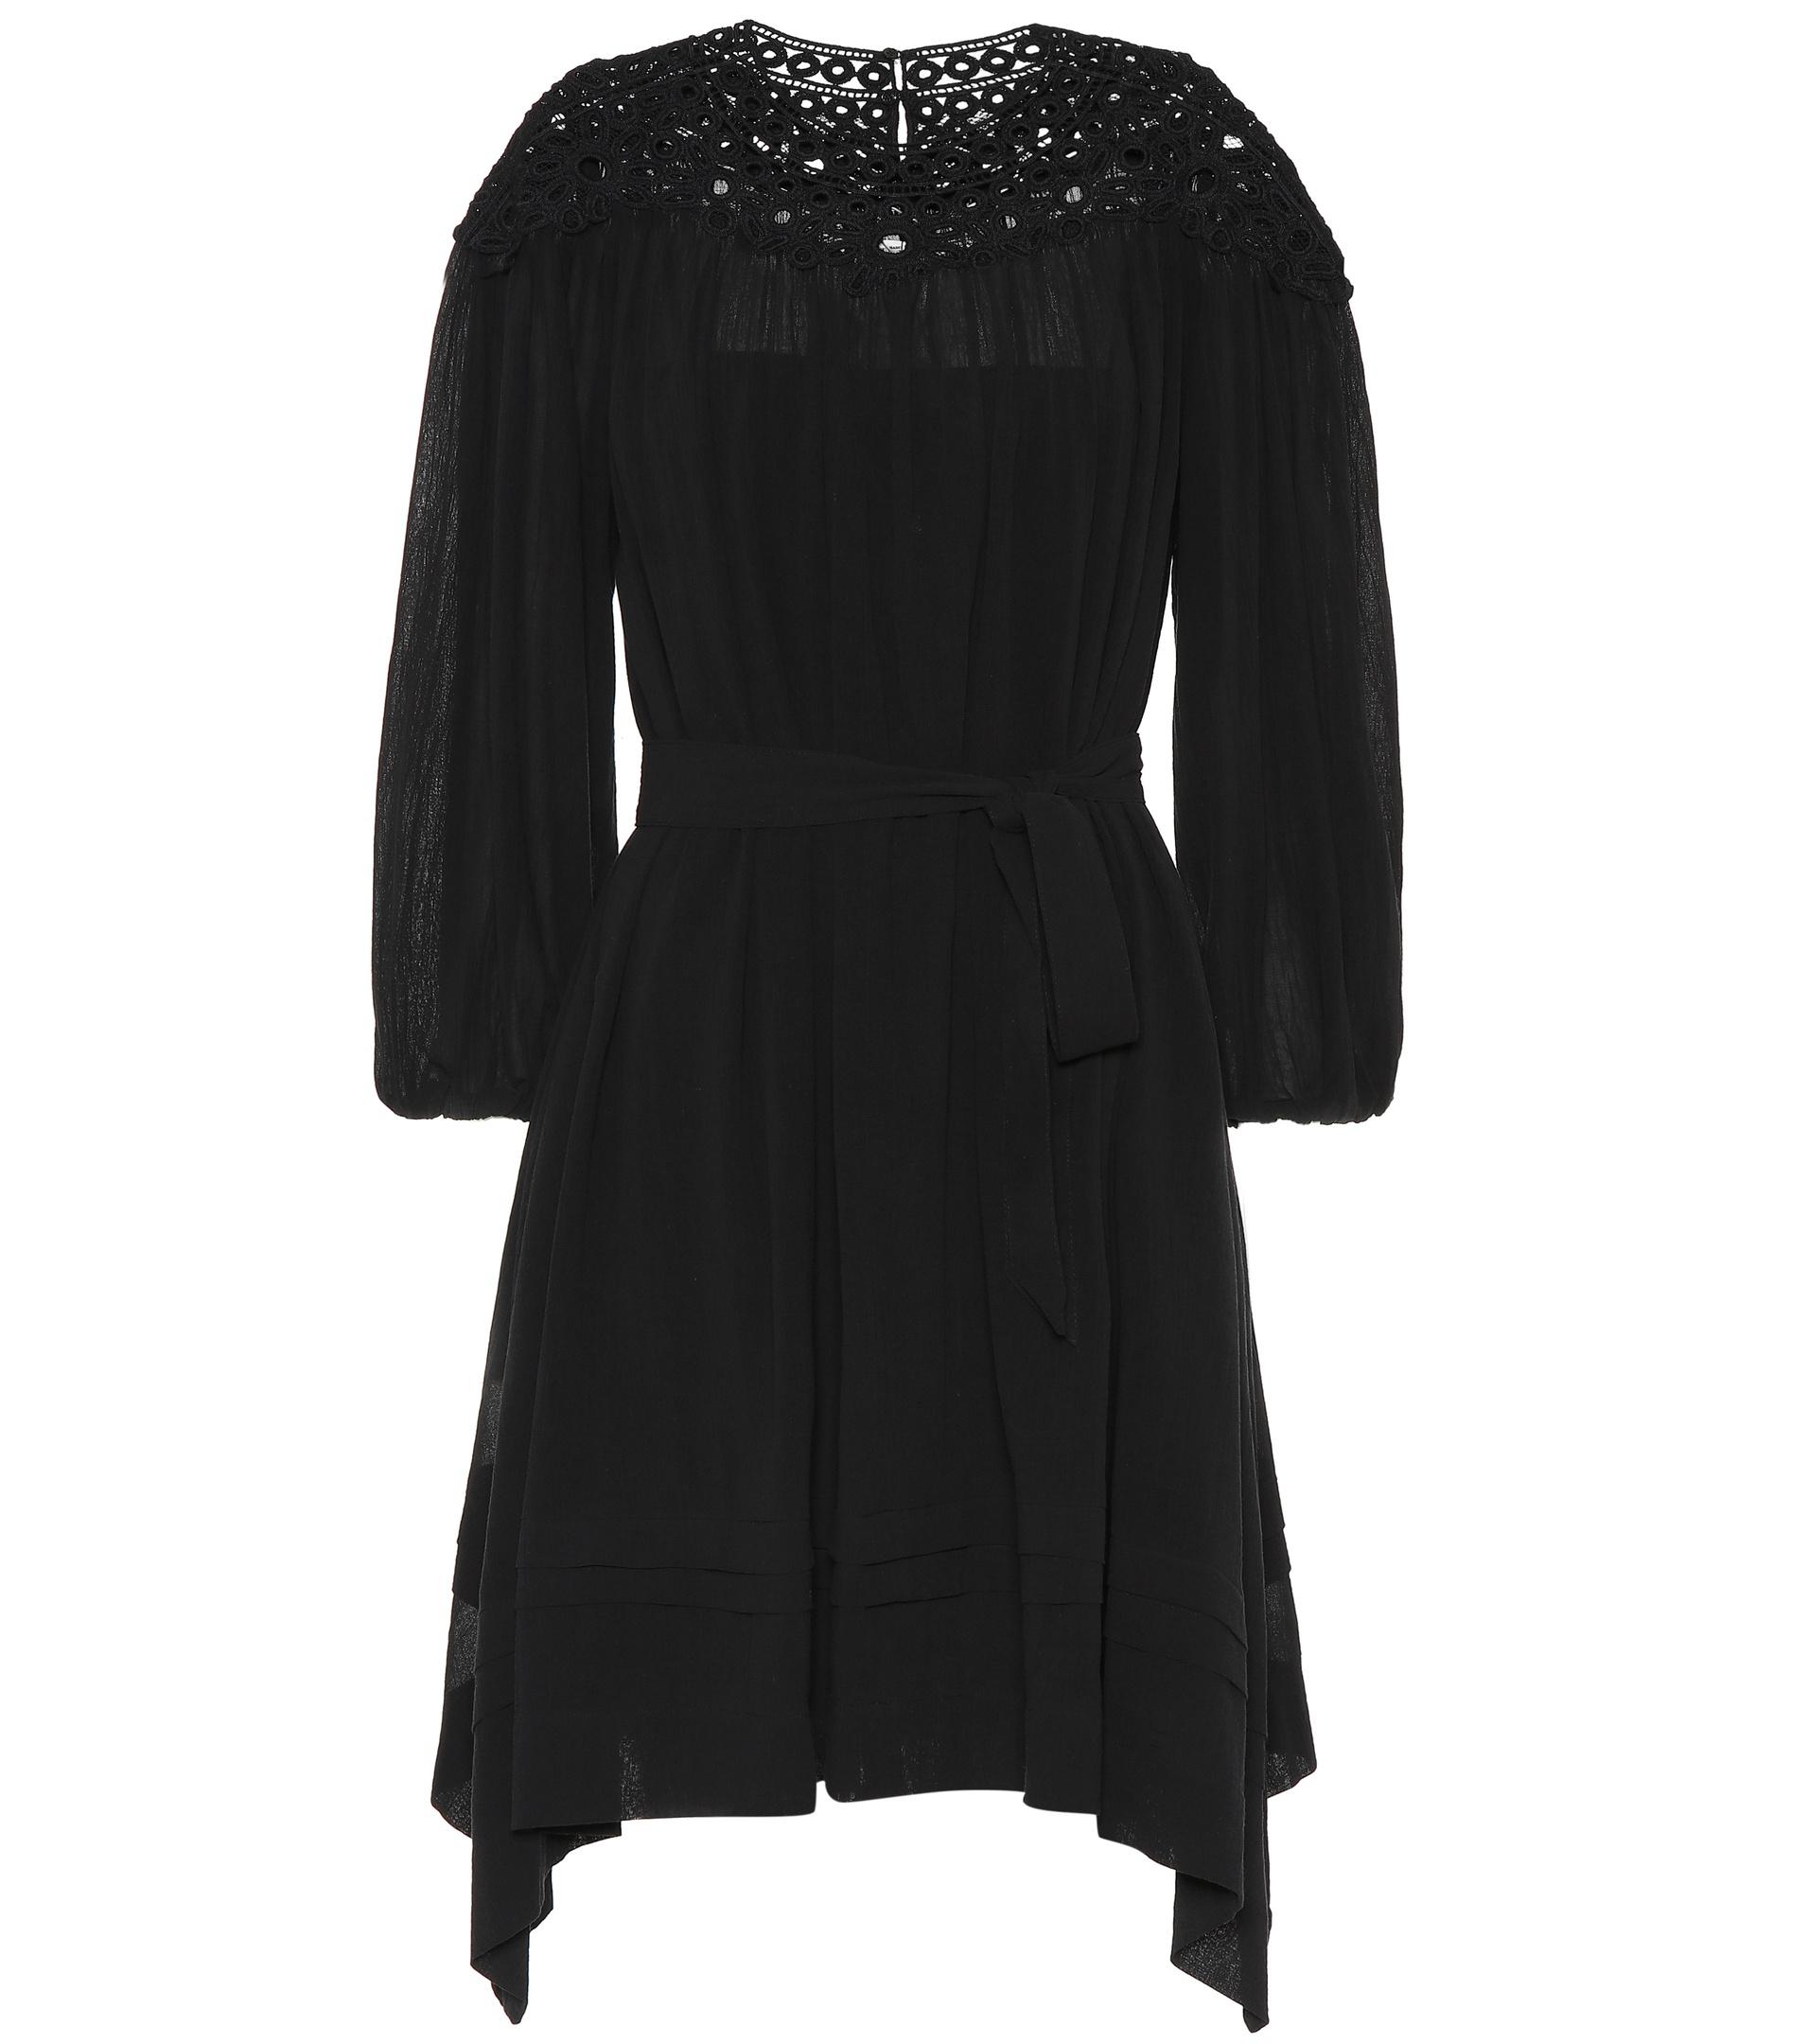 Étoile Isabel Marant Rita Embroidered Cotton Dress in Black - Lyst